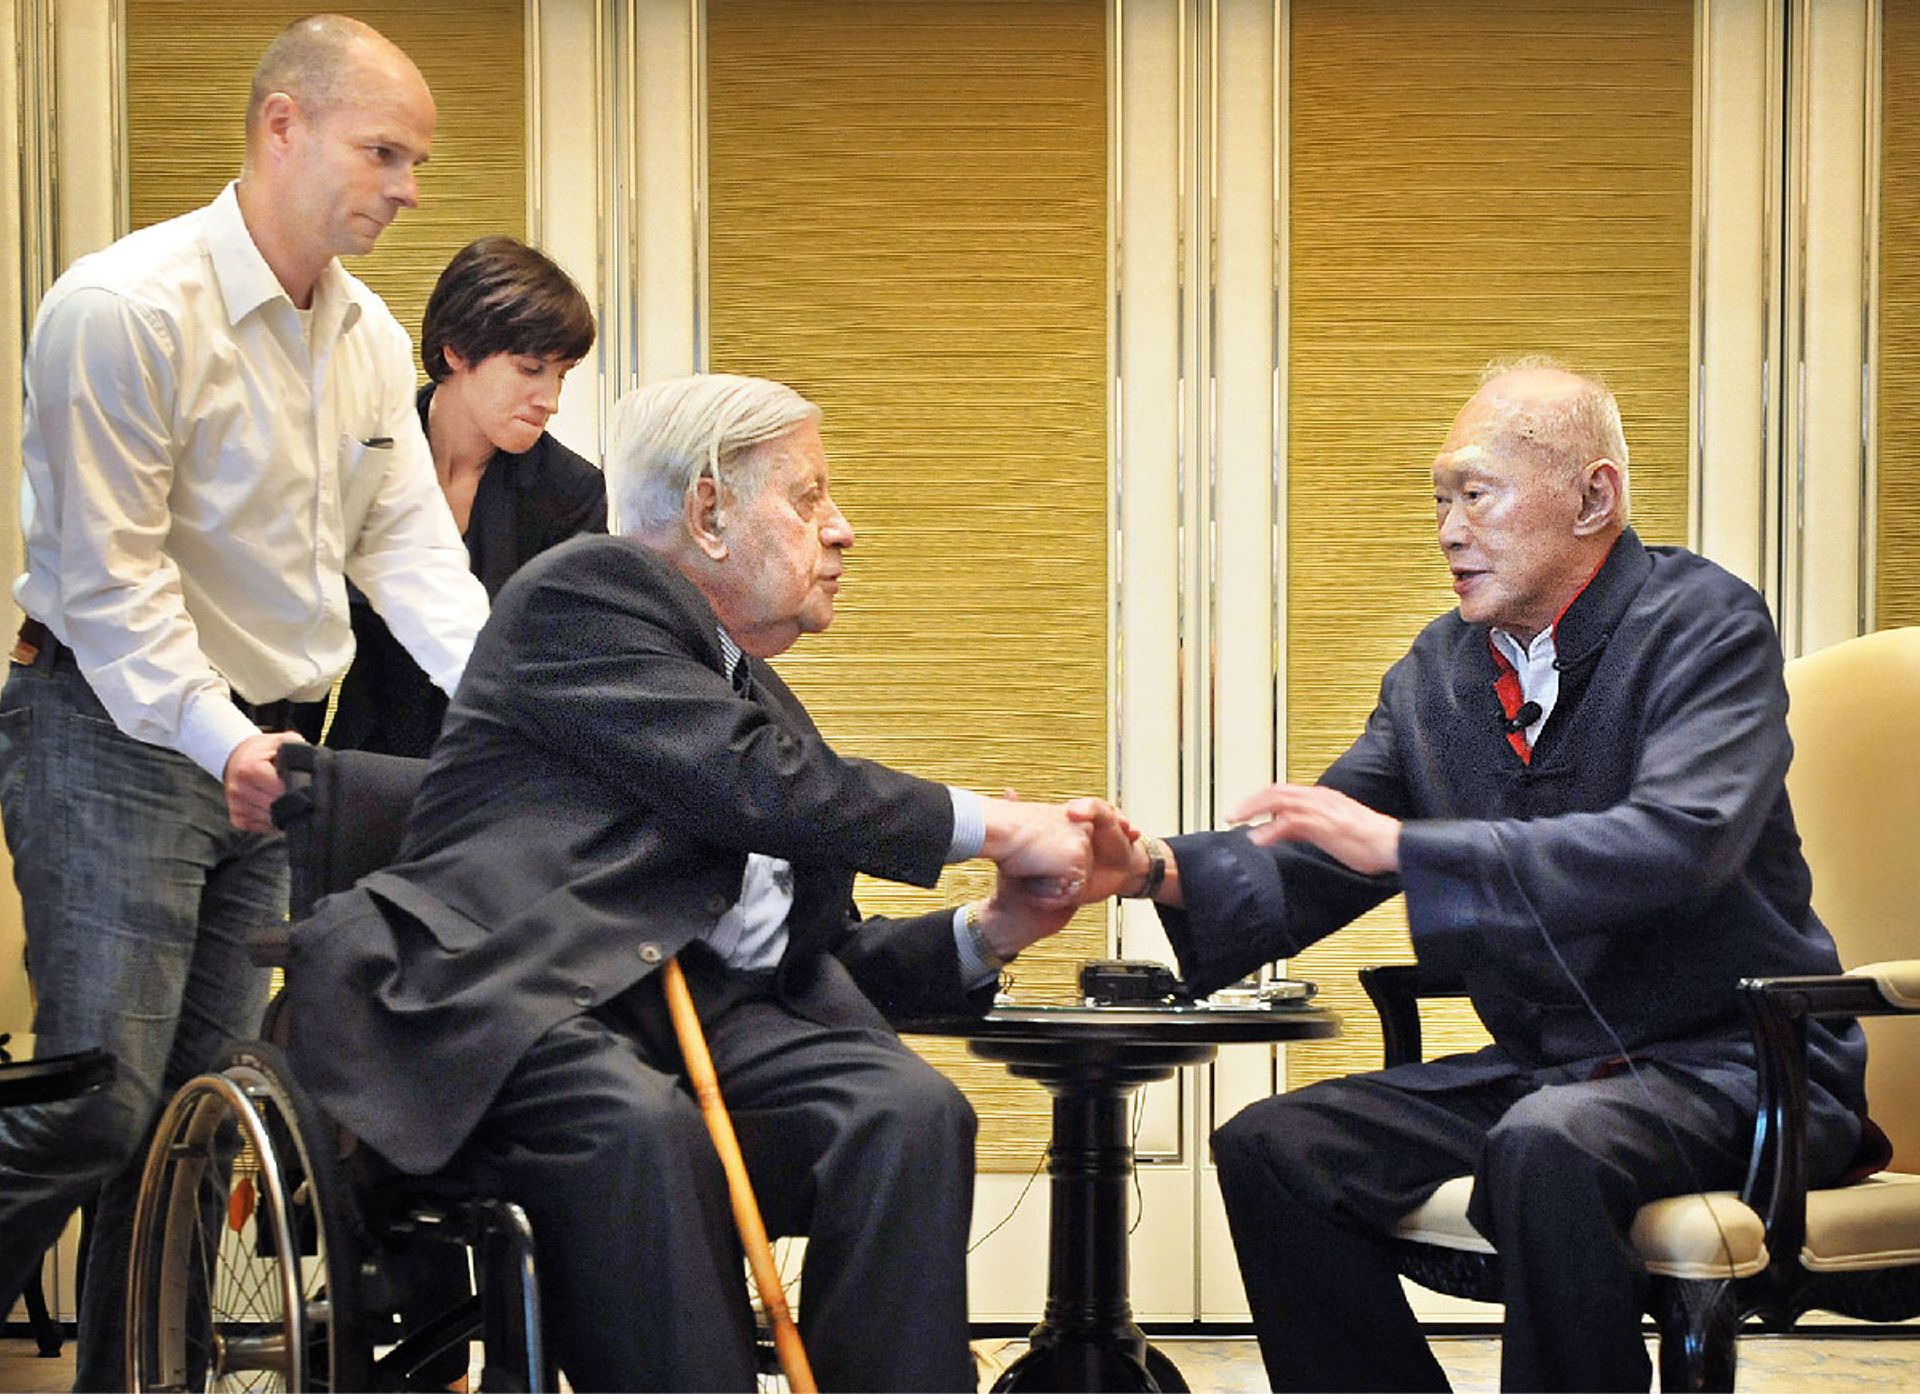 Saying goodbye to former German chancellor Helmut Schmidt, 91, who travelled to Singapore to bid Mr Lee, 88, a final farewell on May 7, 2012. Mr Schmidt died in November 2015, eight months after Mr Lee’s death. ST Photo: Alphonsus Chern